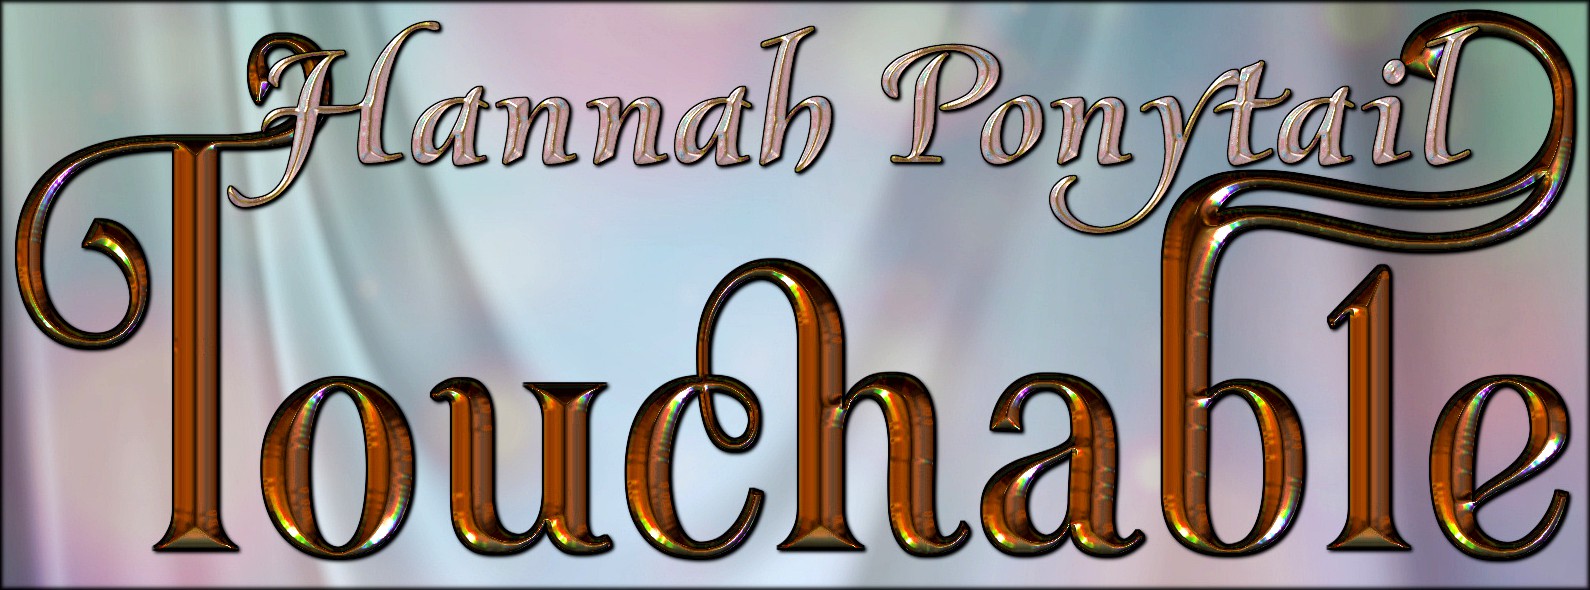 Touchable Hannah Ponytail